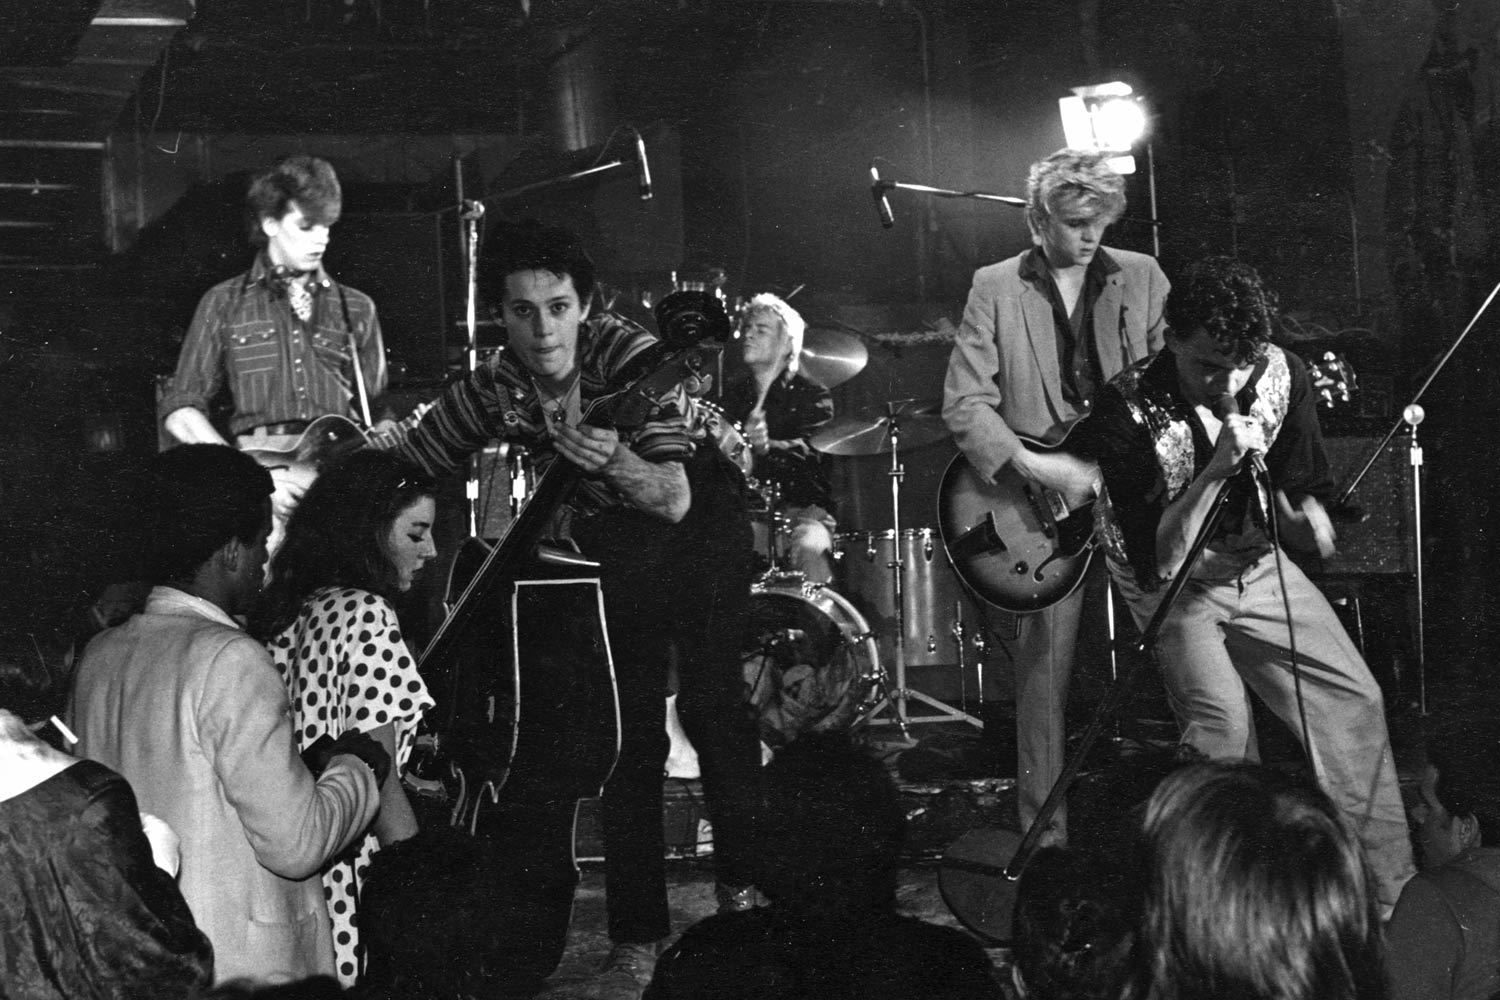 Levi and the Rockats blending punk and rockabilly on stage at CBGB in 1979